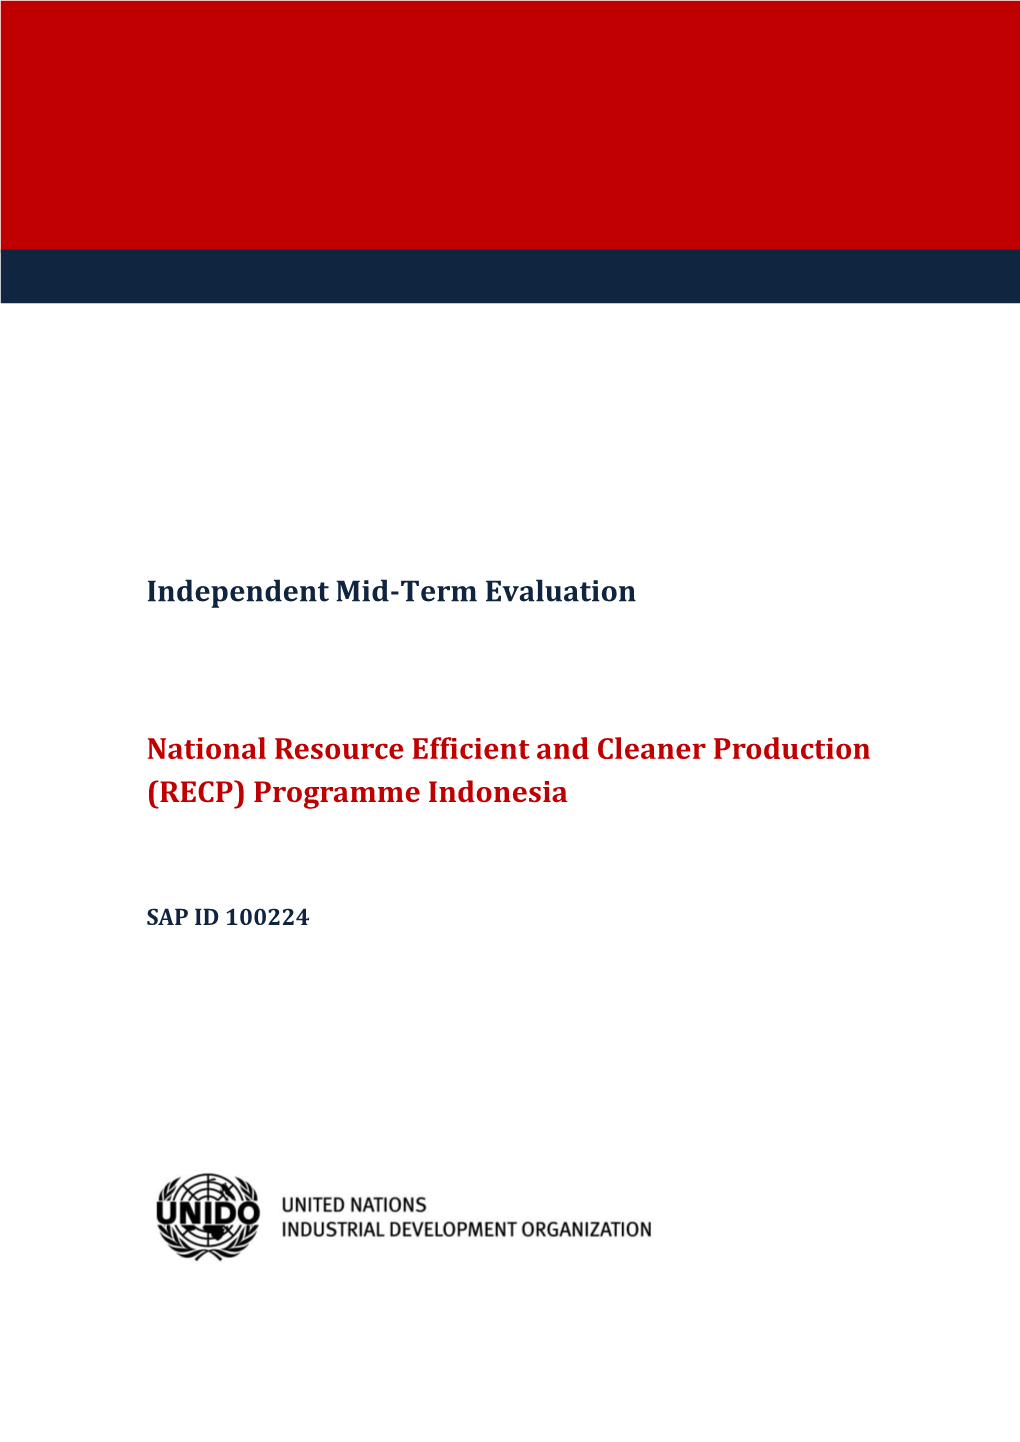 National Resource Efficient and Cleaner Production RECP